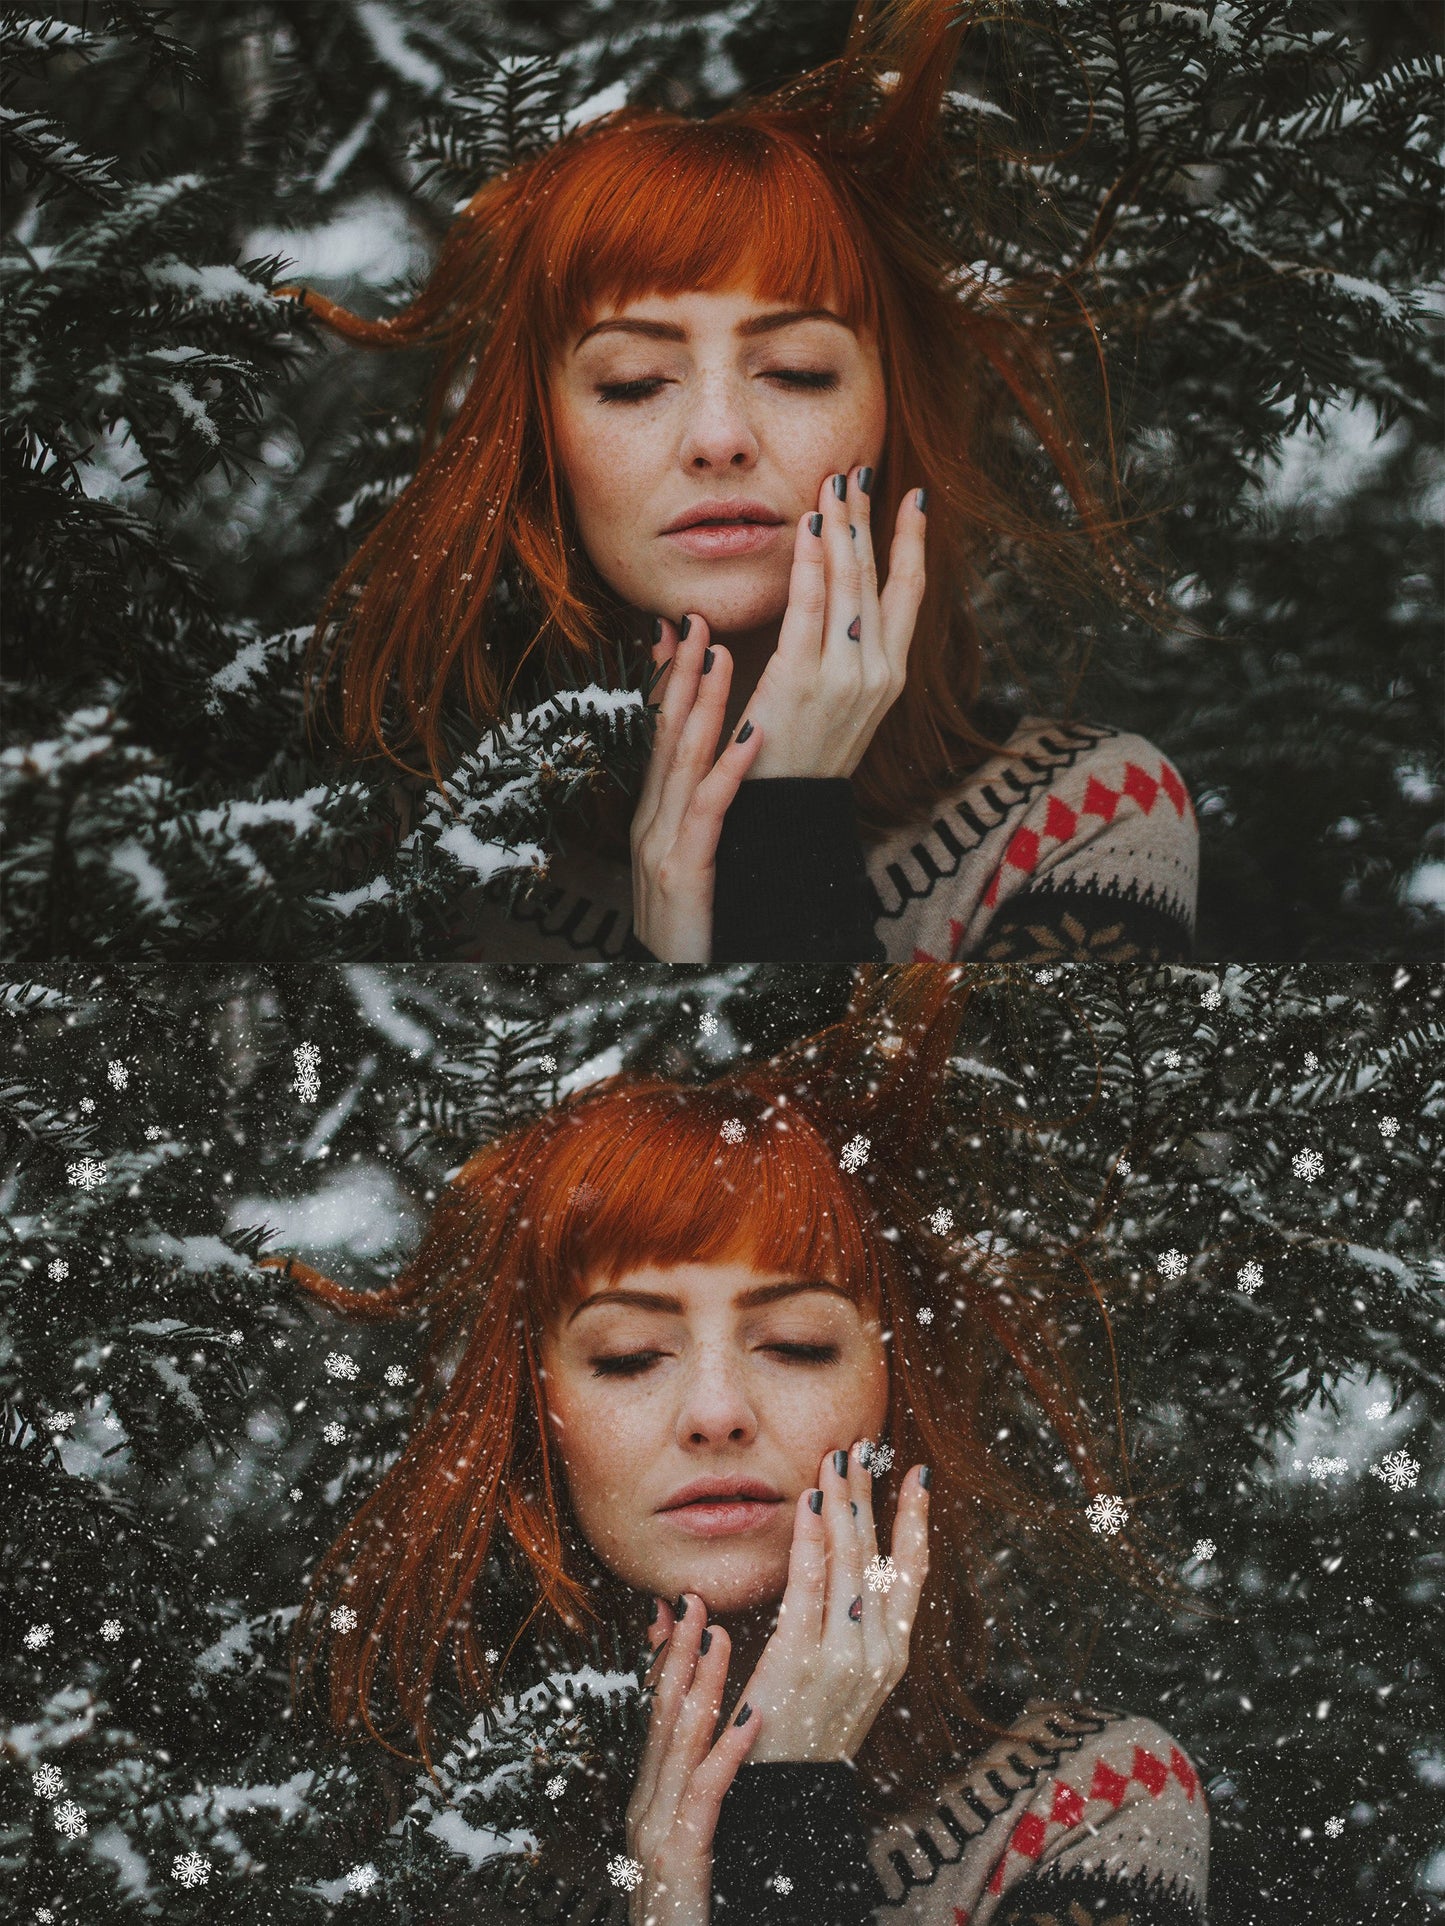 Falling Snowflakes Overlays